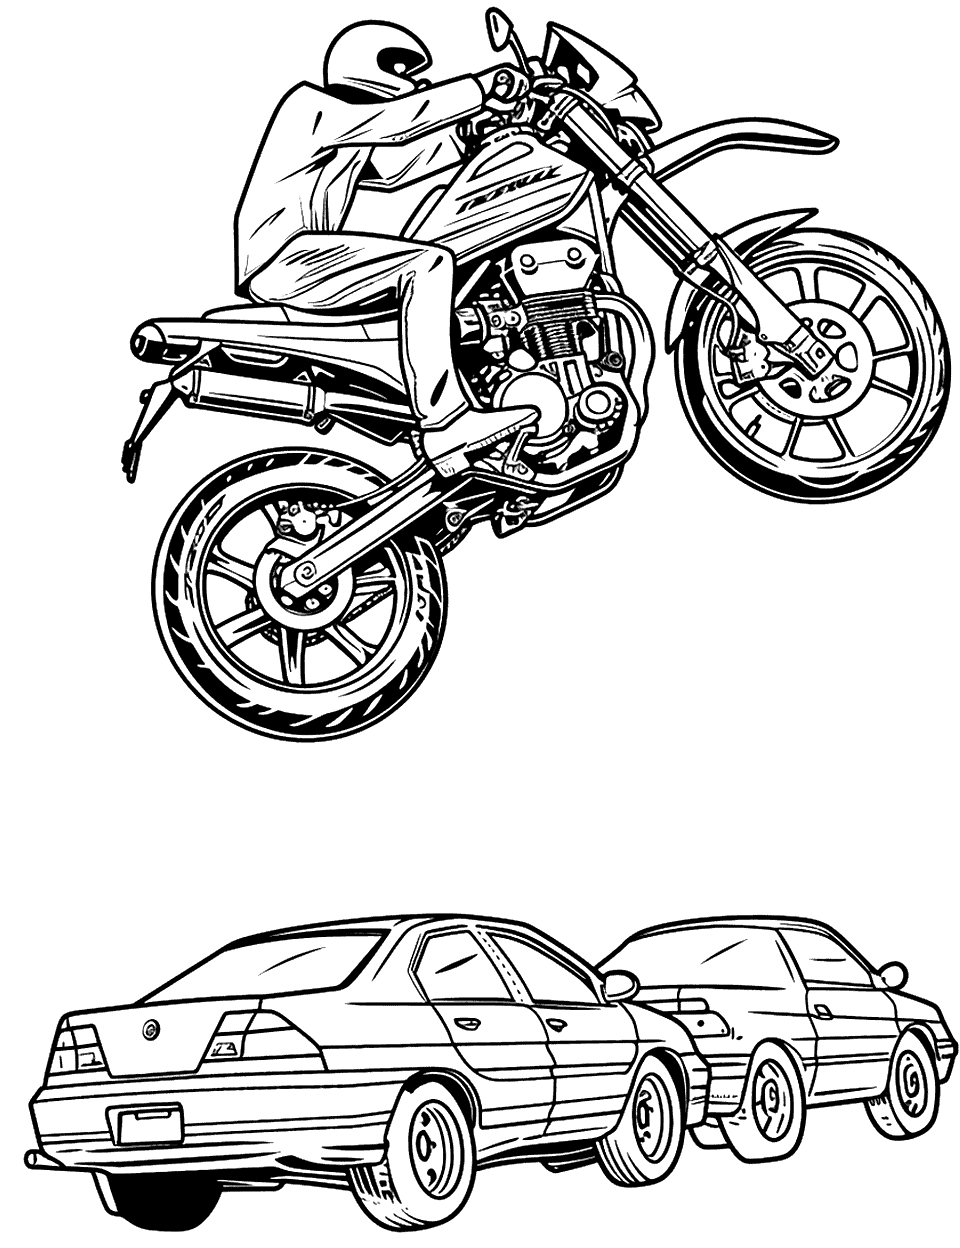 Stunt Motorcycle Jump Coloring Page - A motorcycle performing a stunt jump over cars lined up.